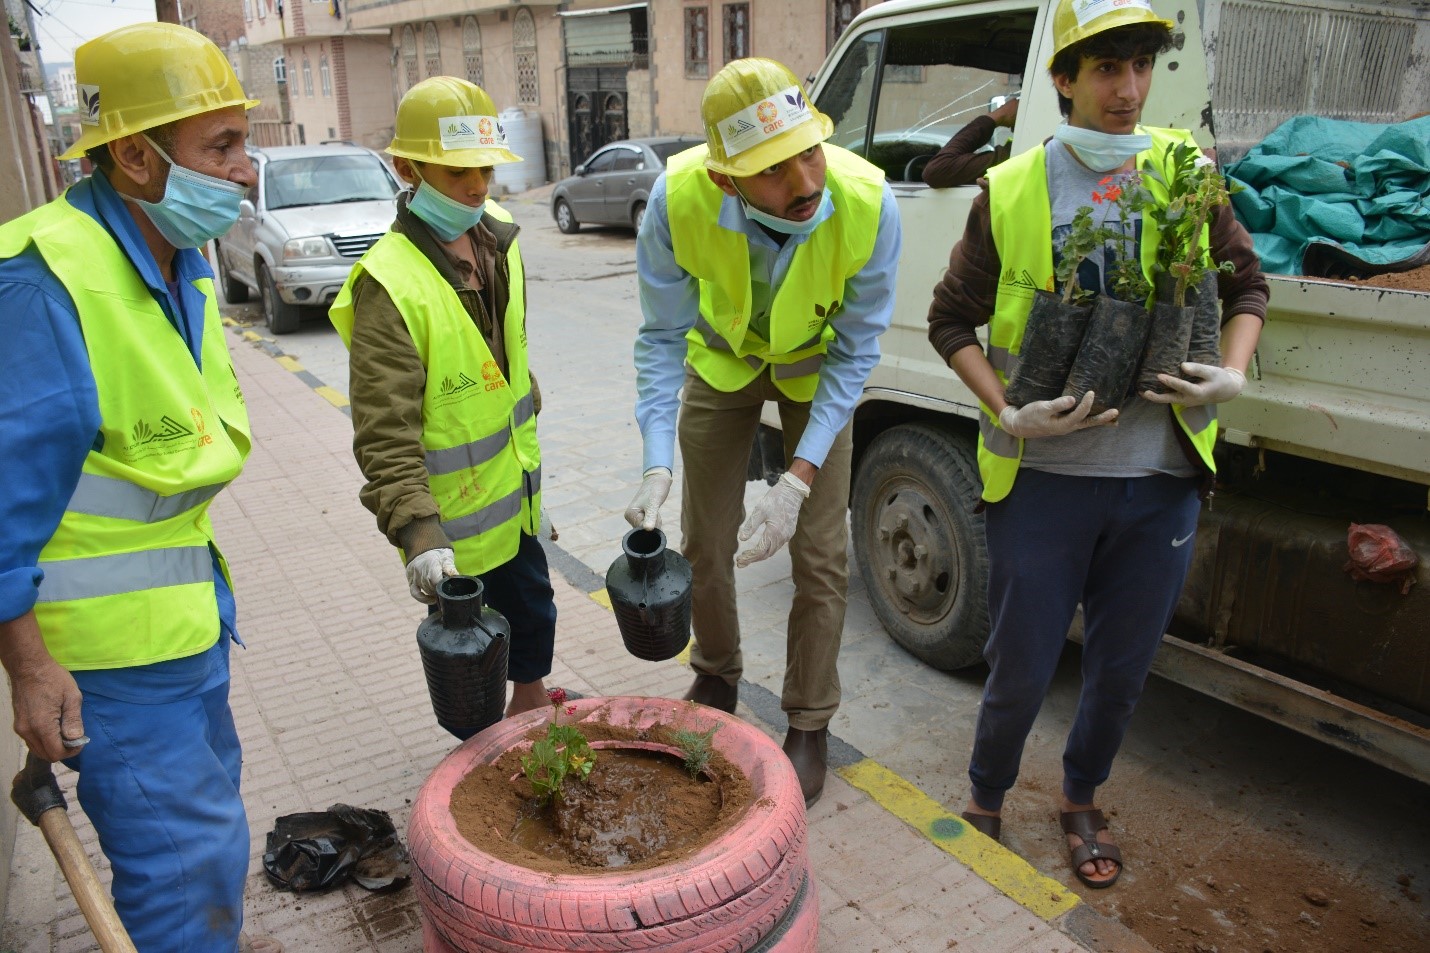 A group of men wearing safety vests and hats holding plants and water cans